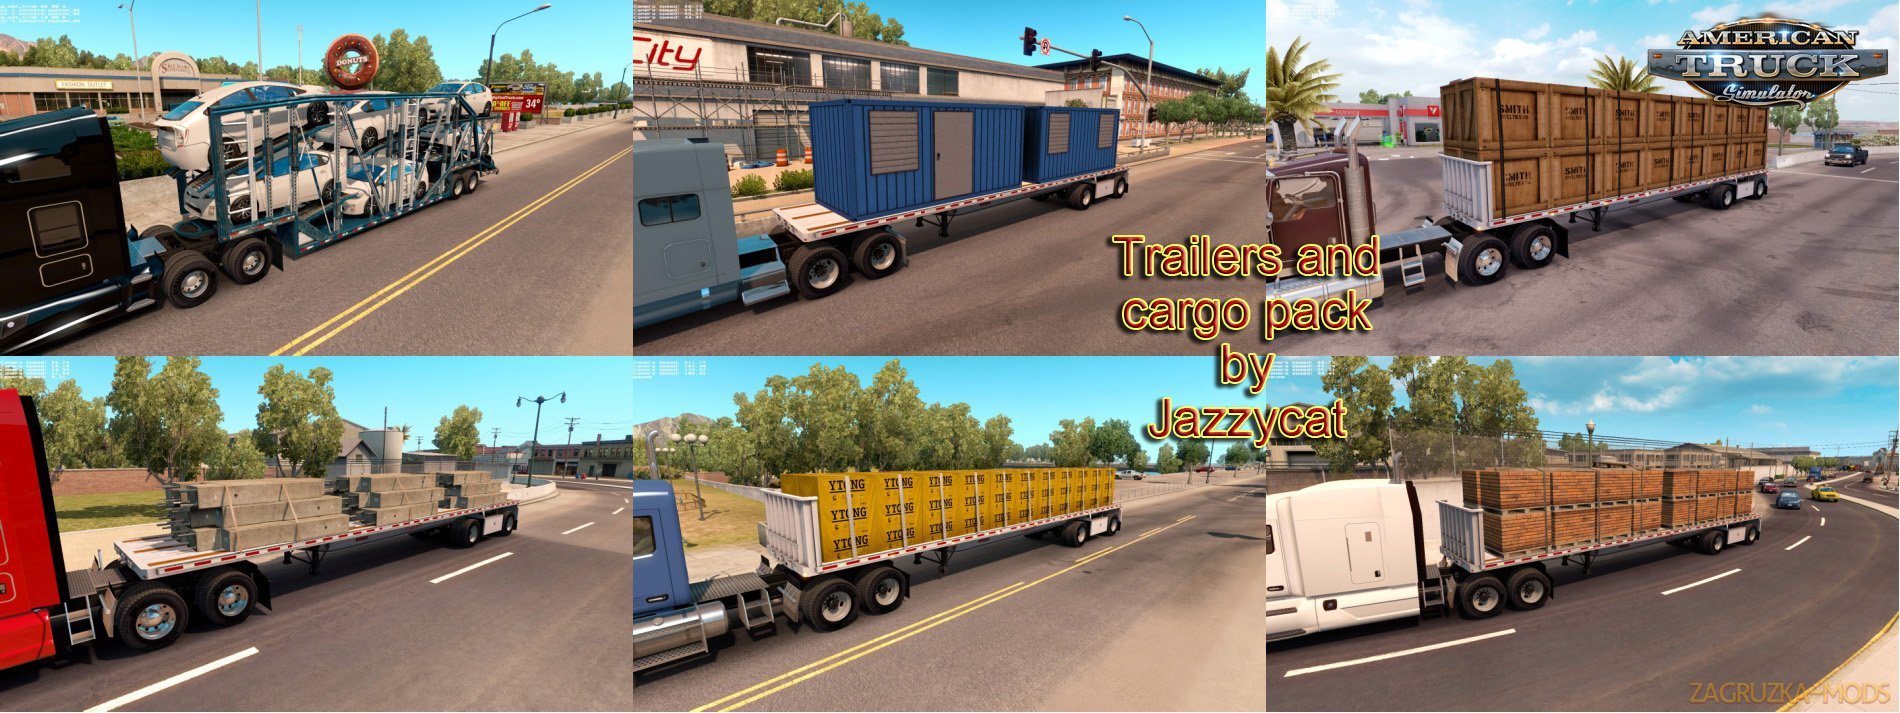 Trailers and Cargo Pack v1.6 by Jazzycat (v1.6.x) for ATS